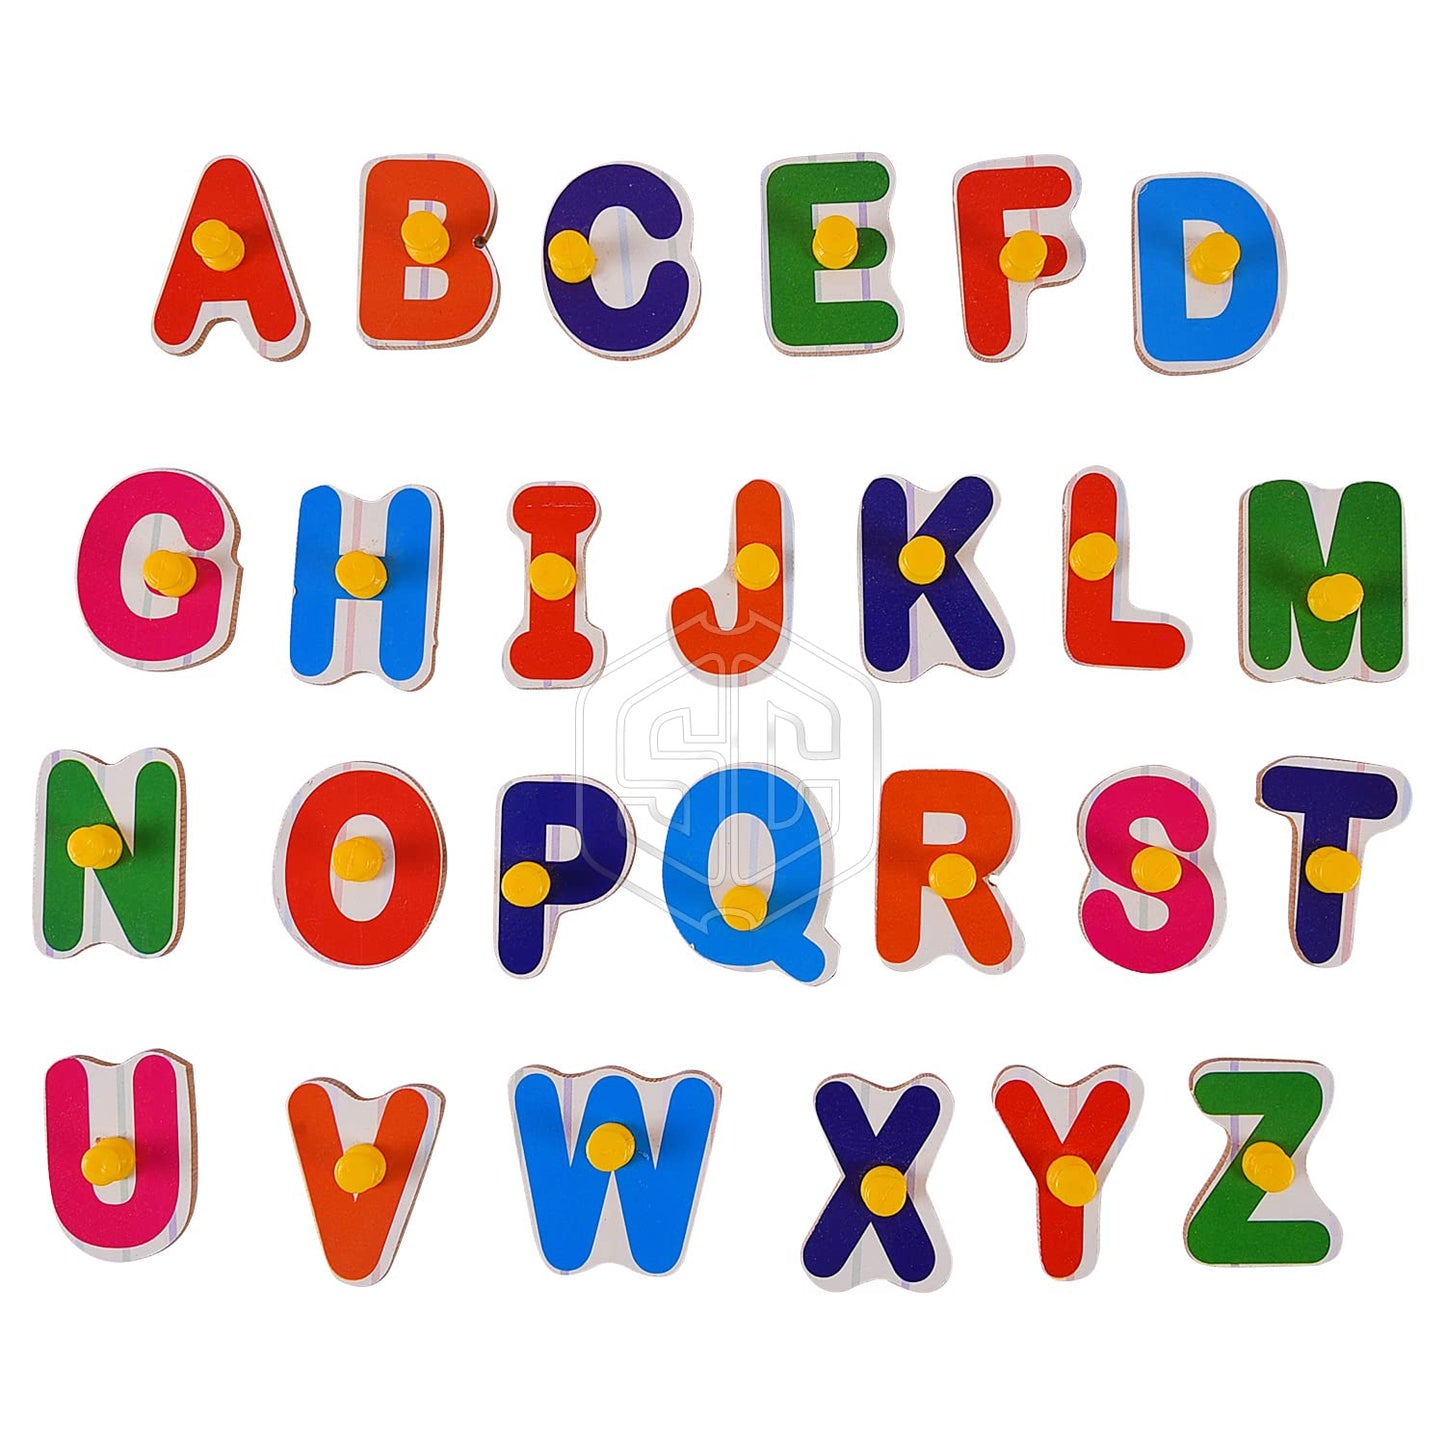 Wooden Capital Alphabet Puzzles, 3d Wooden Capital Alphabet Puzzles With Pictures For Children Educational Learning Letters Puzzle Board Toy